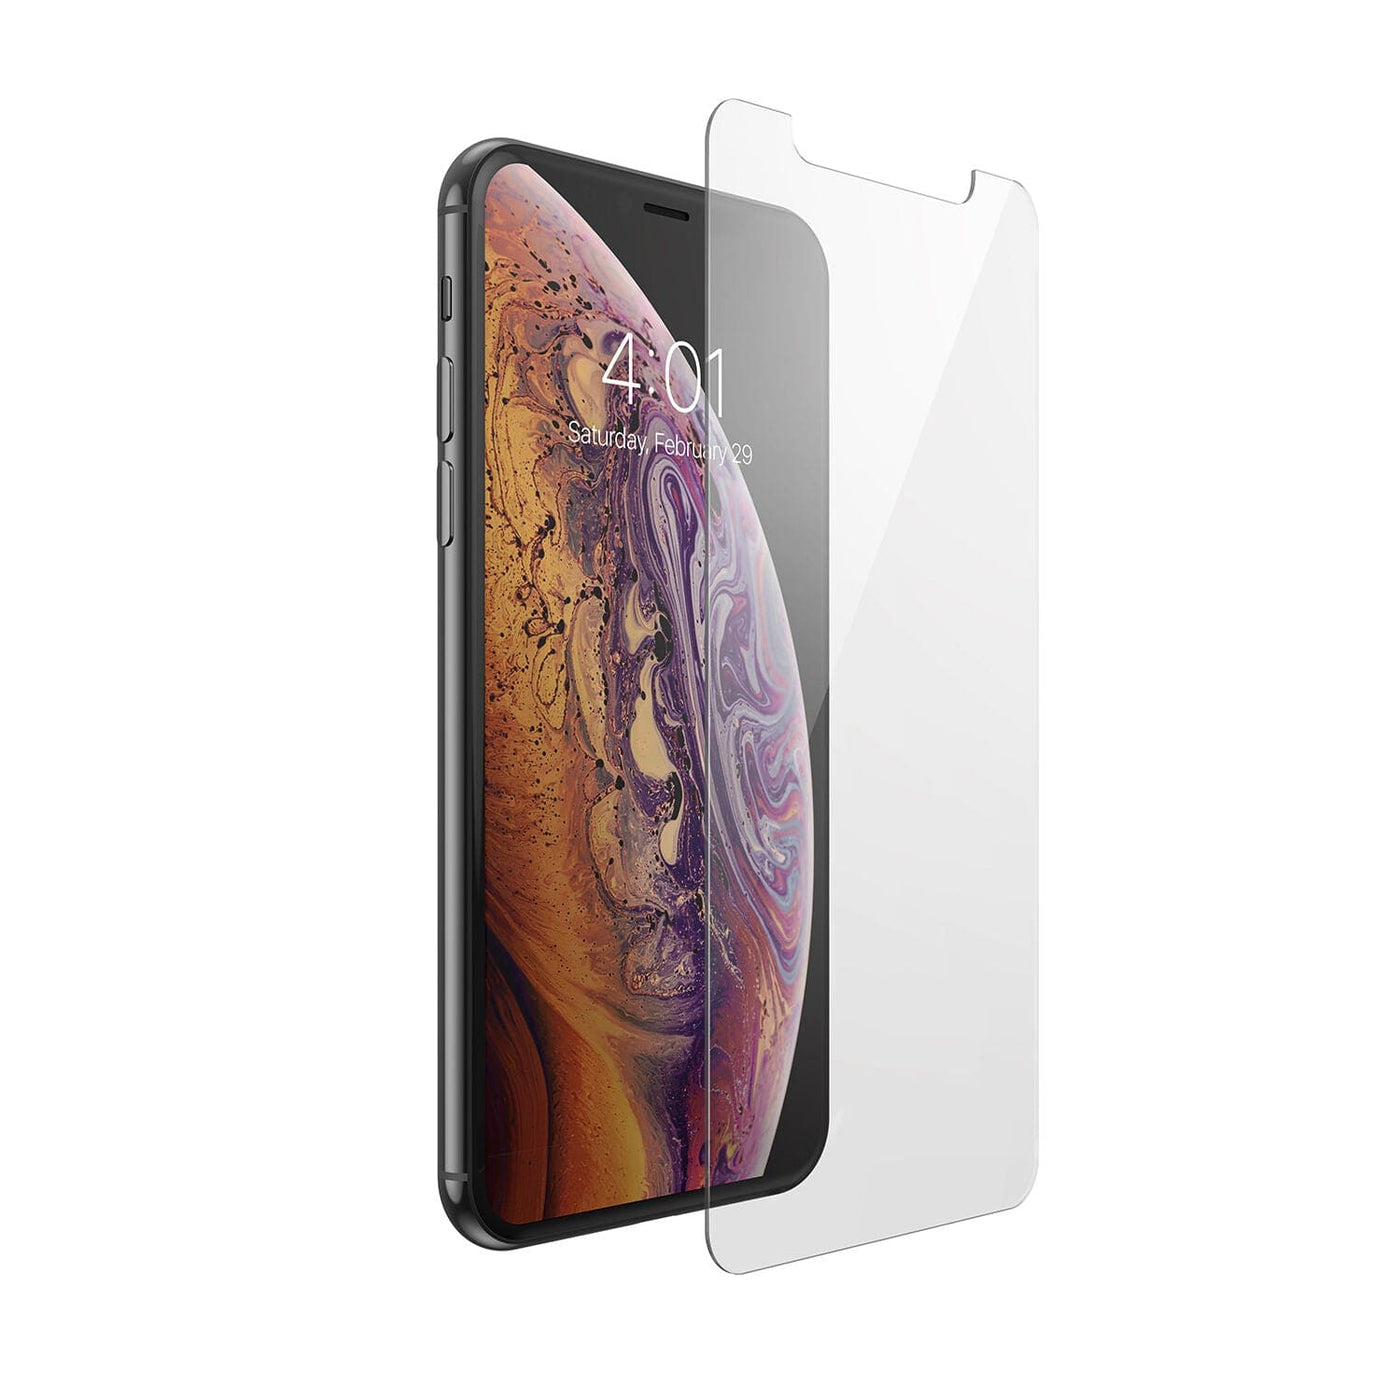 Screen protectors and cases, iPhone 11 Pro